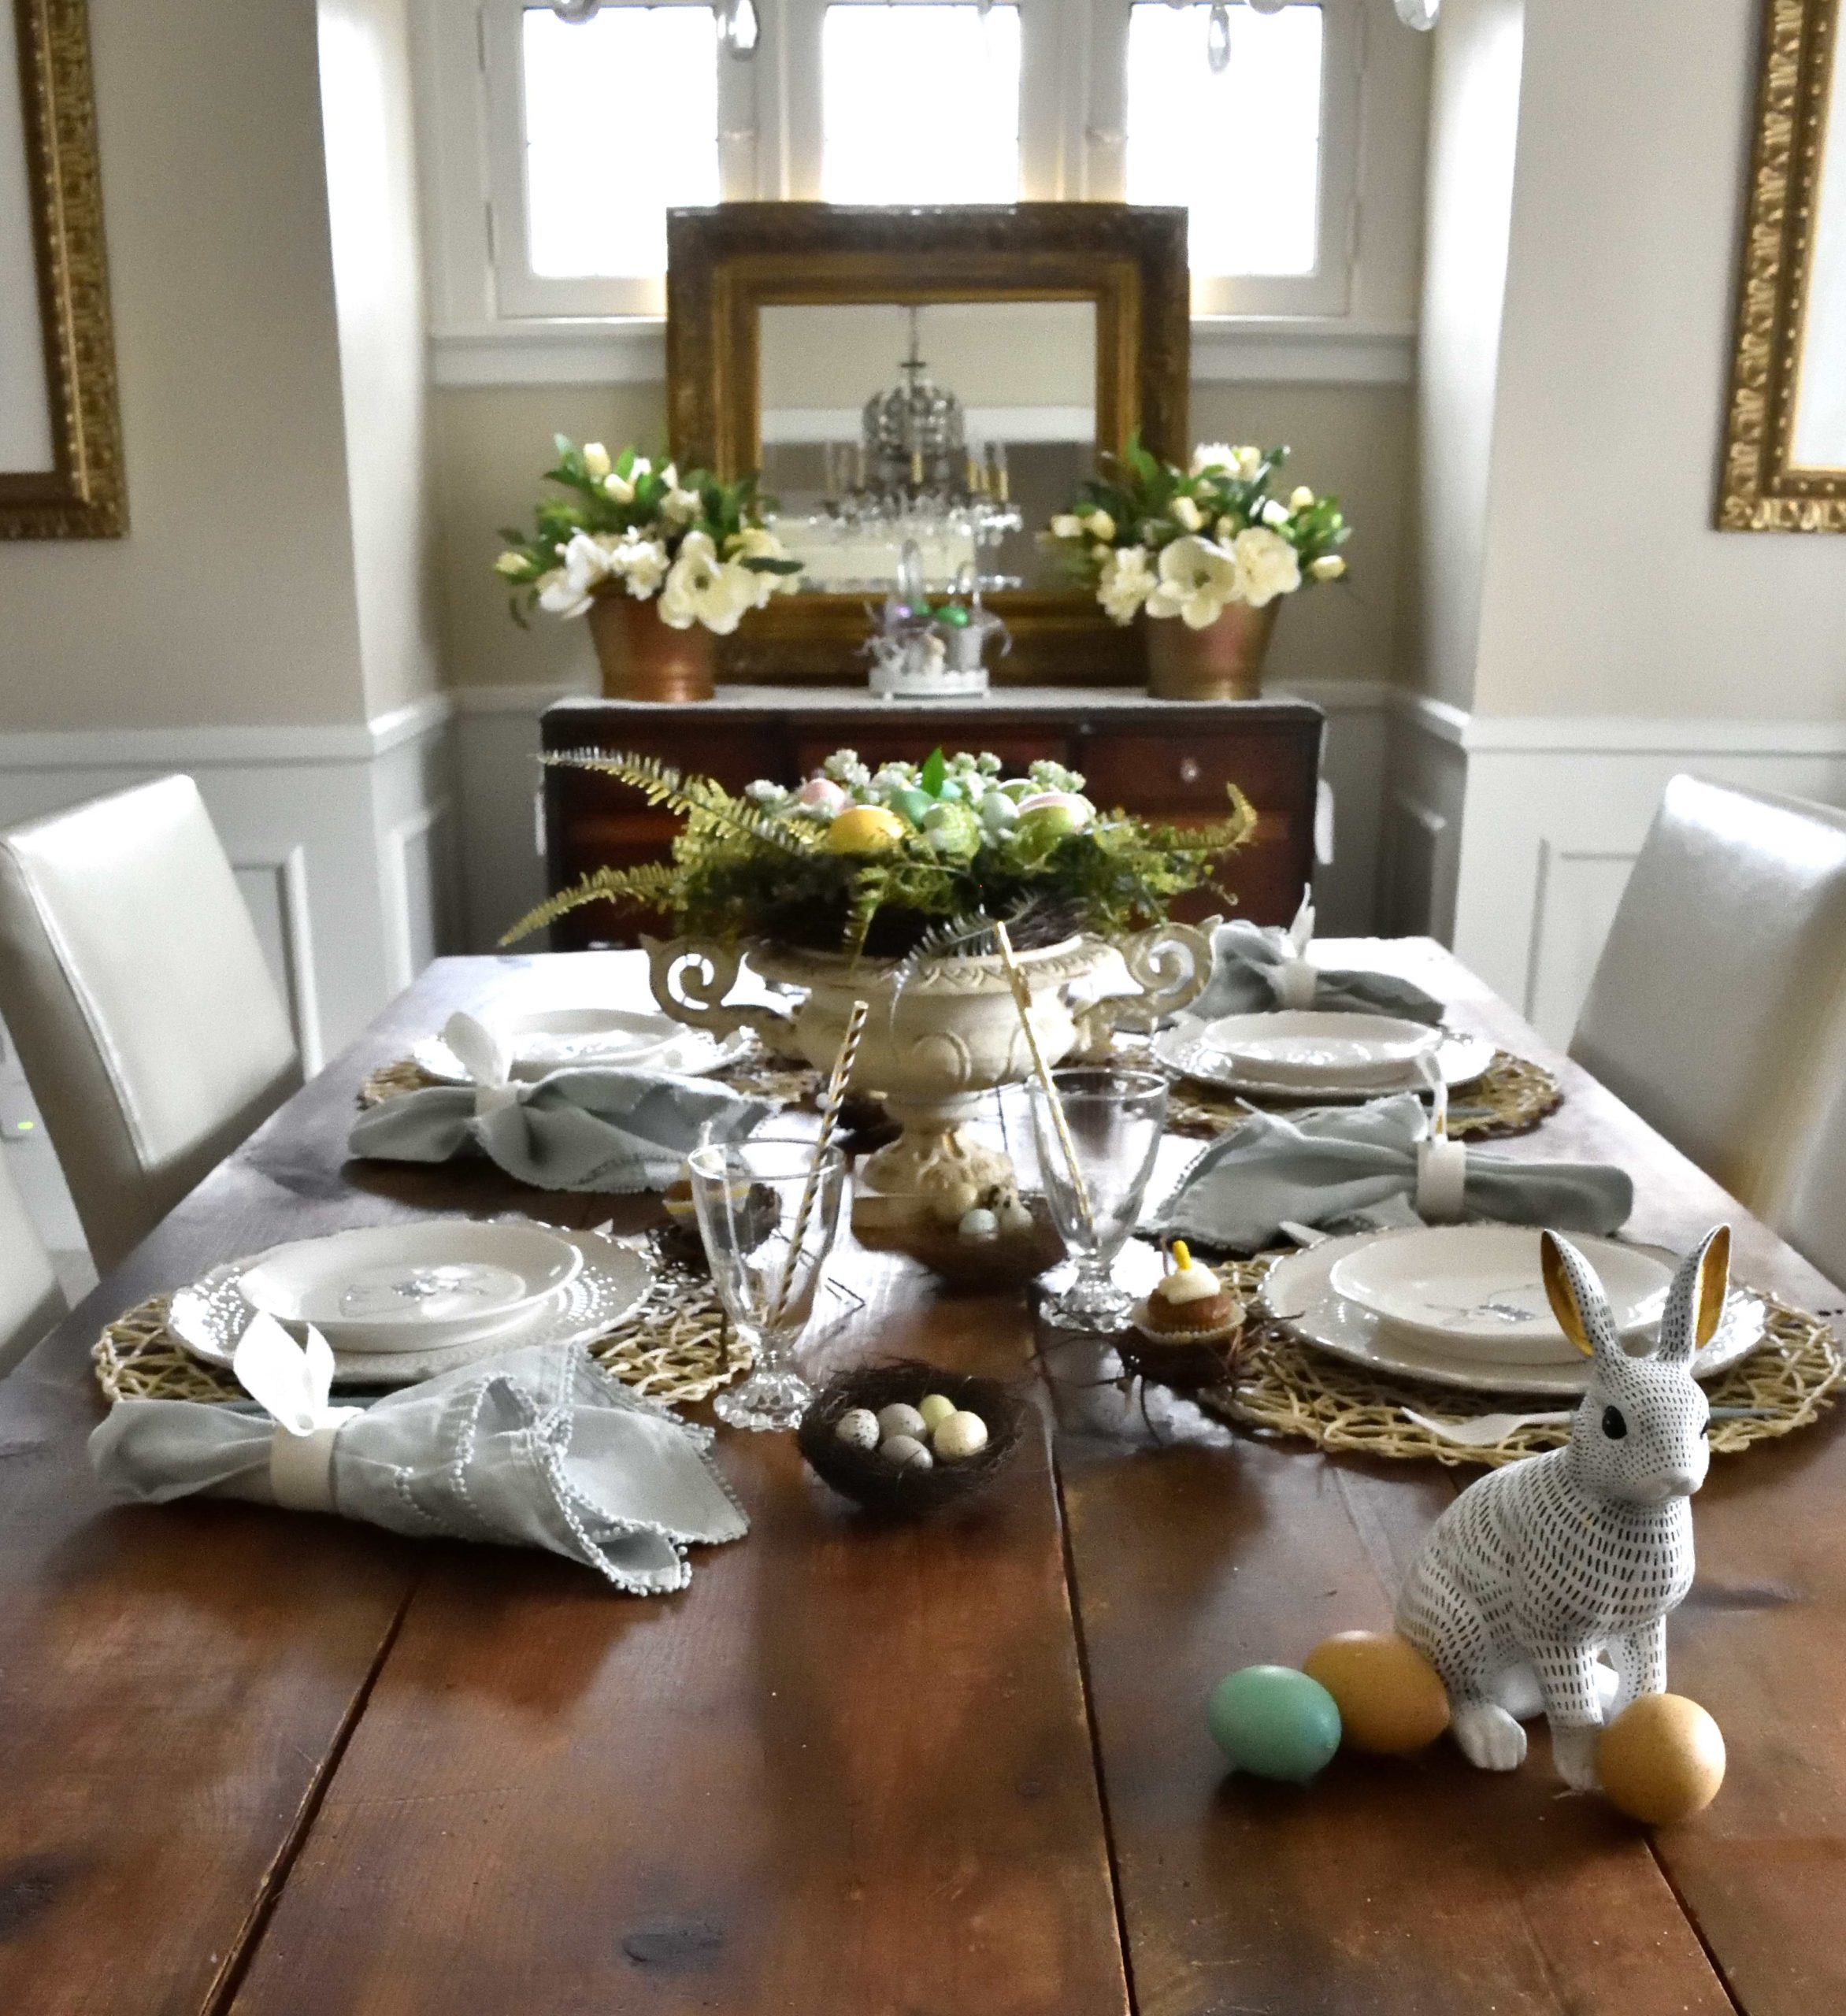 Simple Easter table